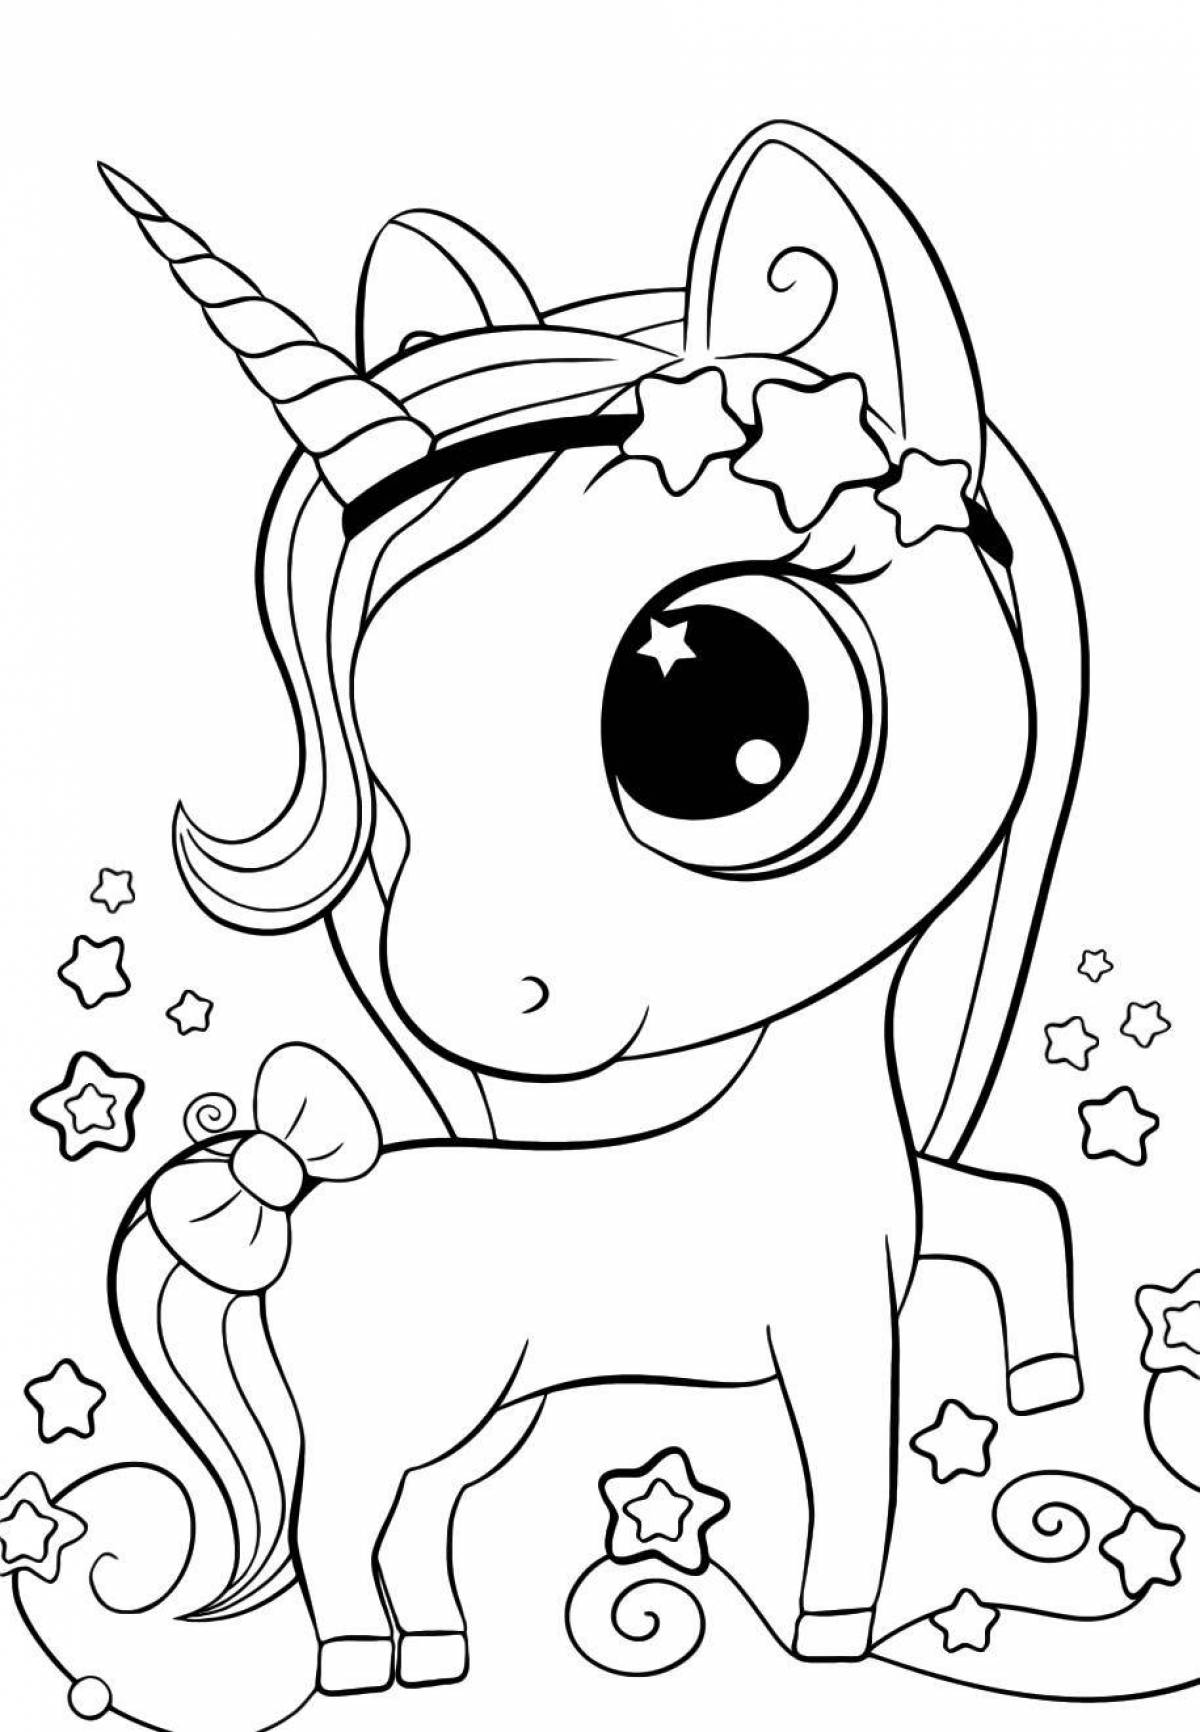 Amazing coloring book for girls 7 years old unicorn